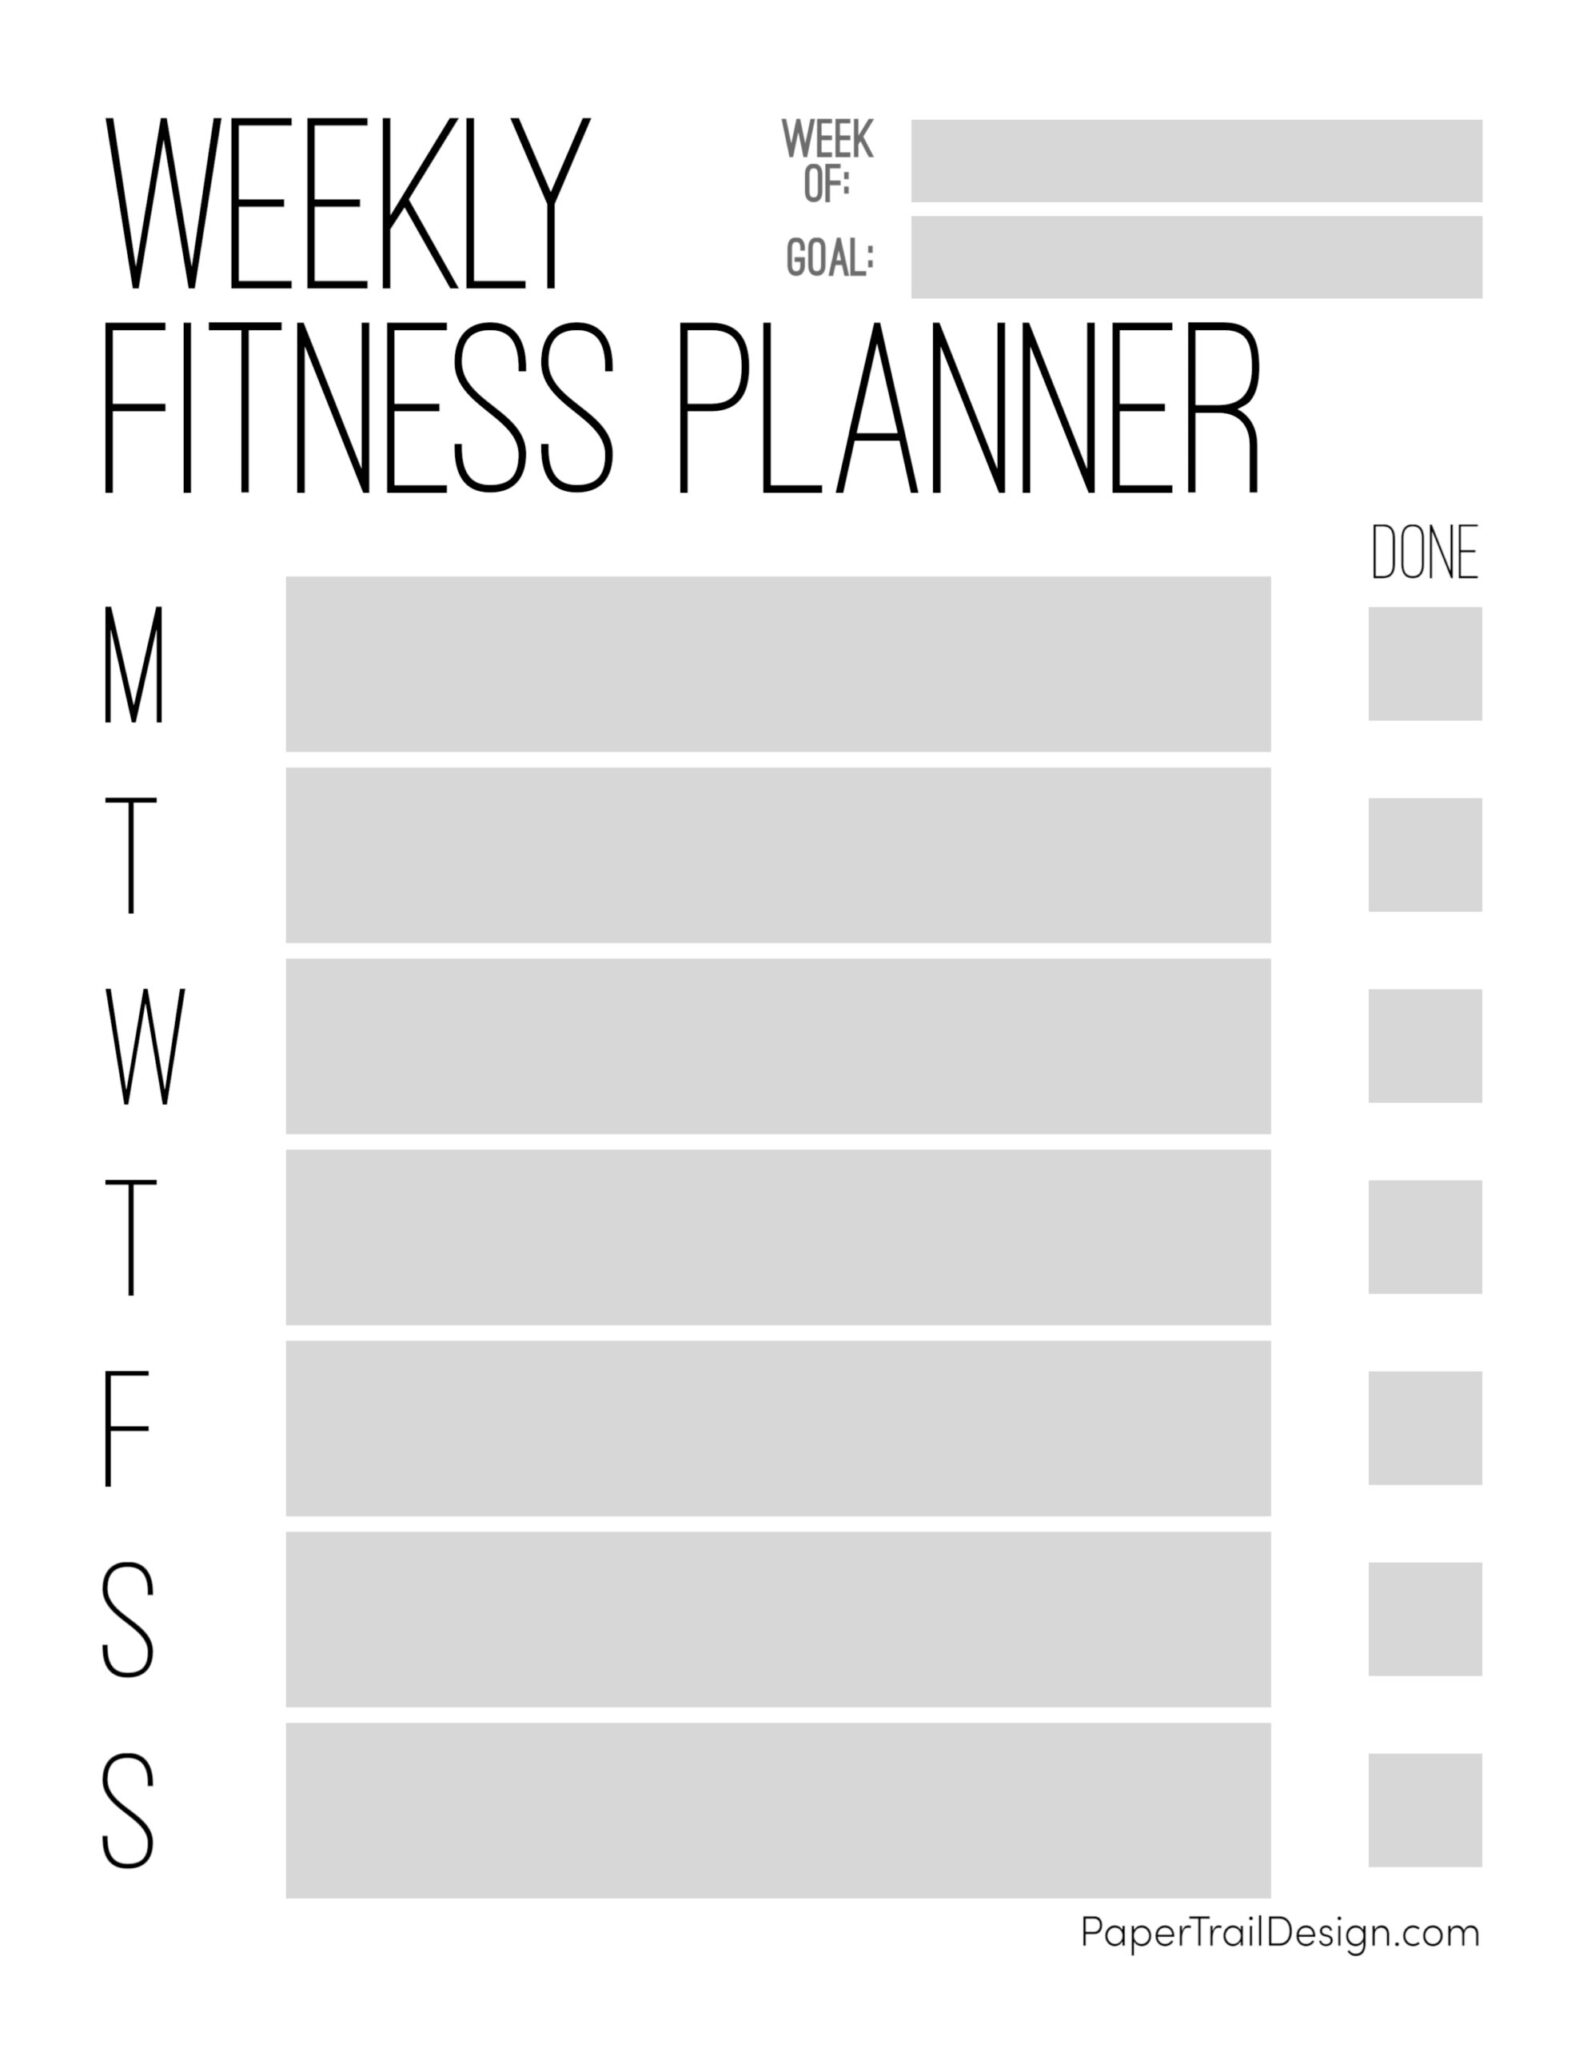 Weekly Fitness Planner Printable Paper Trail Design